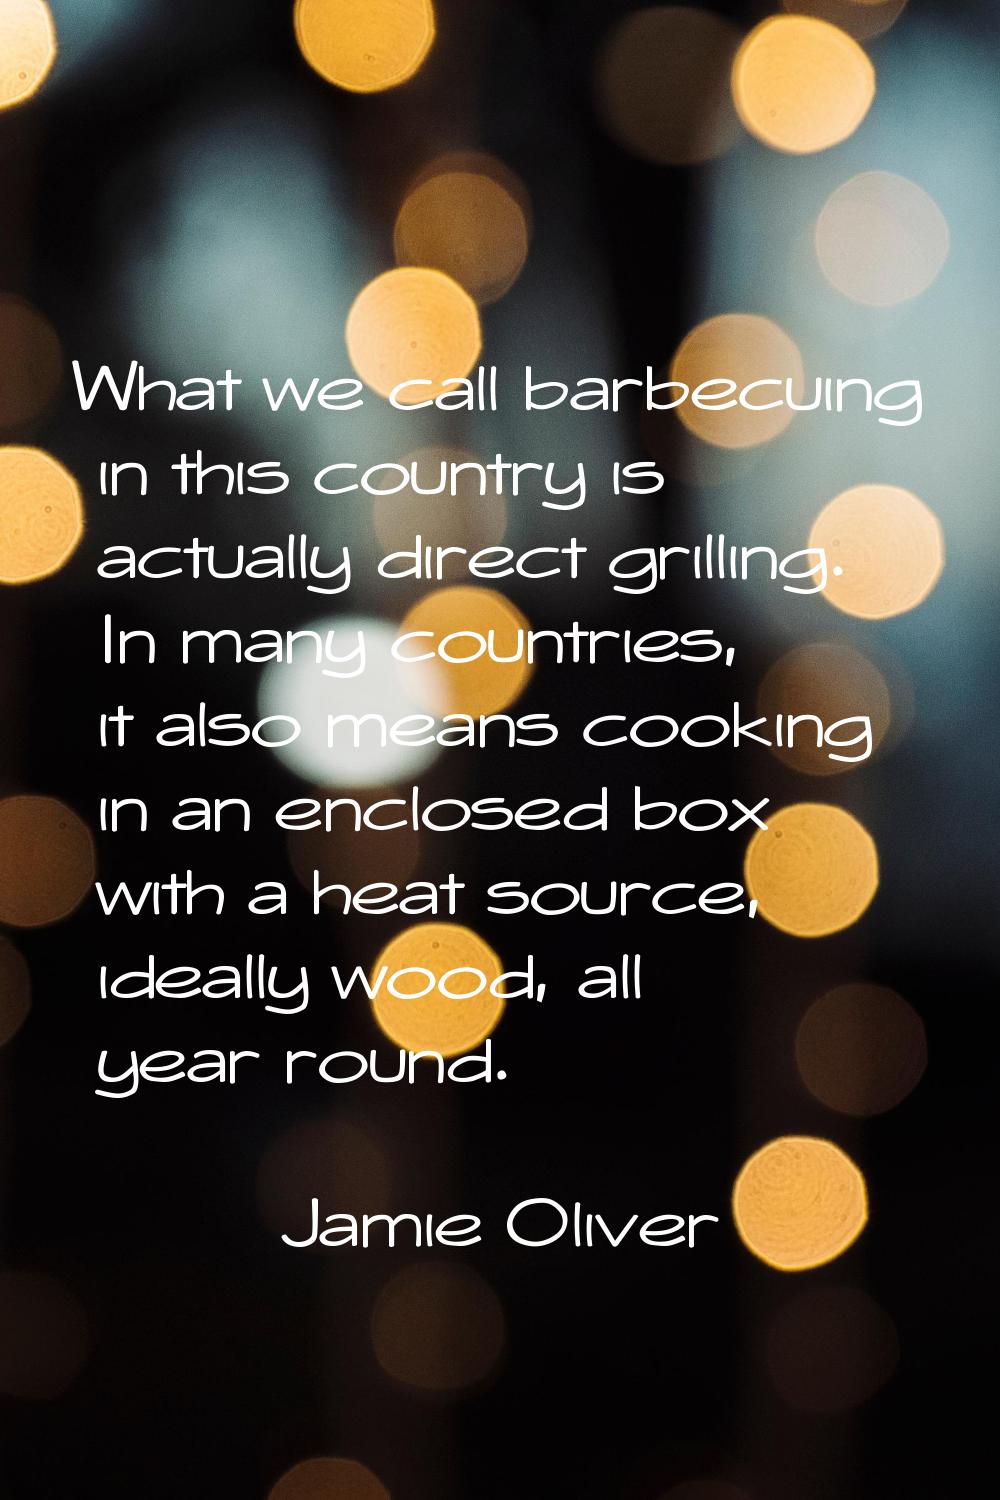 What we call barbecuing in this country is actually direct grilling. In many countries, it also mea